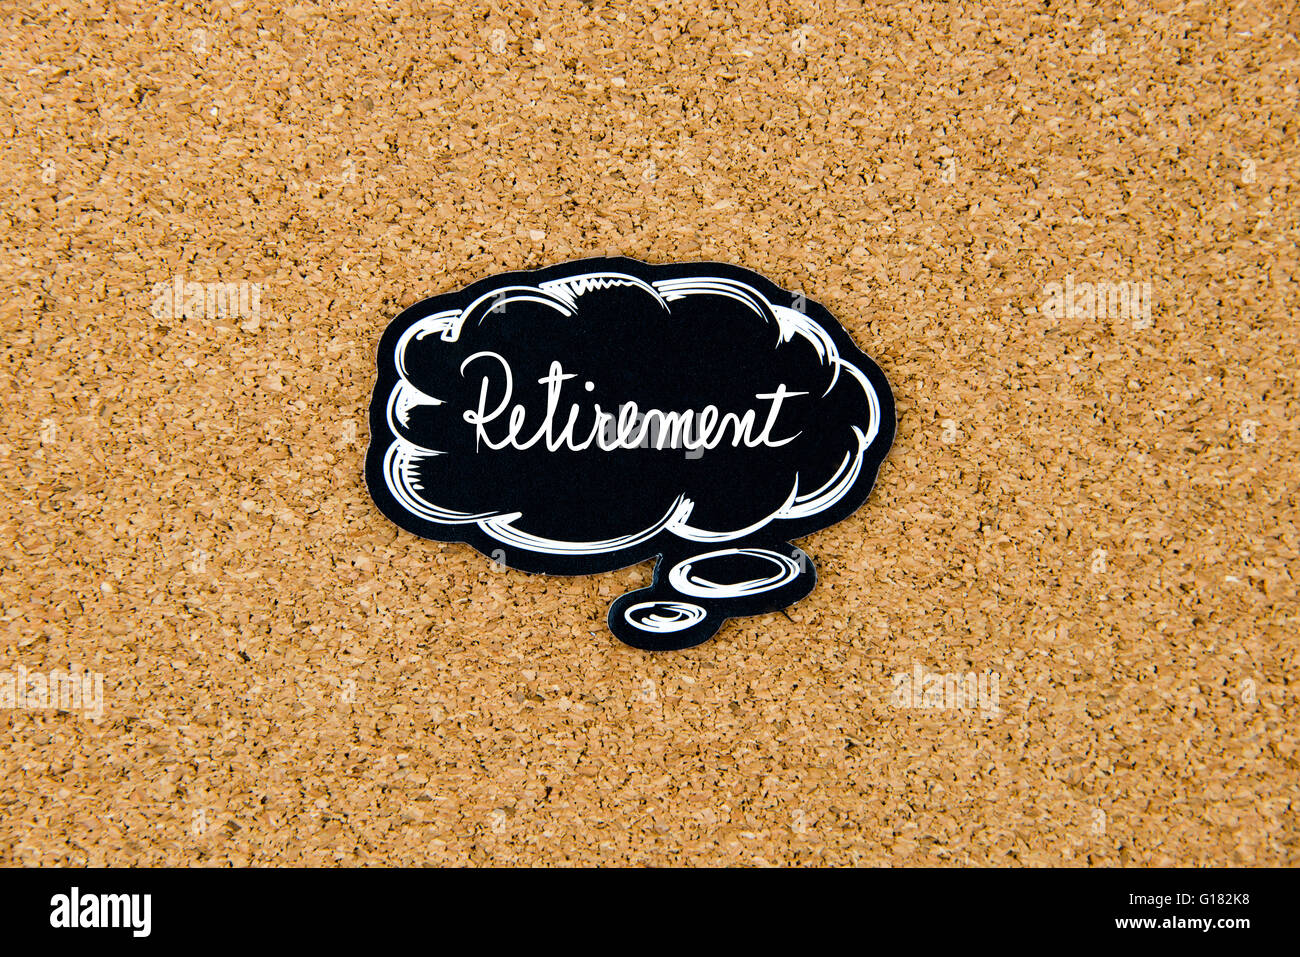 RETIREMENT written on black thinking bubble over cork board background, copy space available Stock Photo